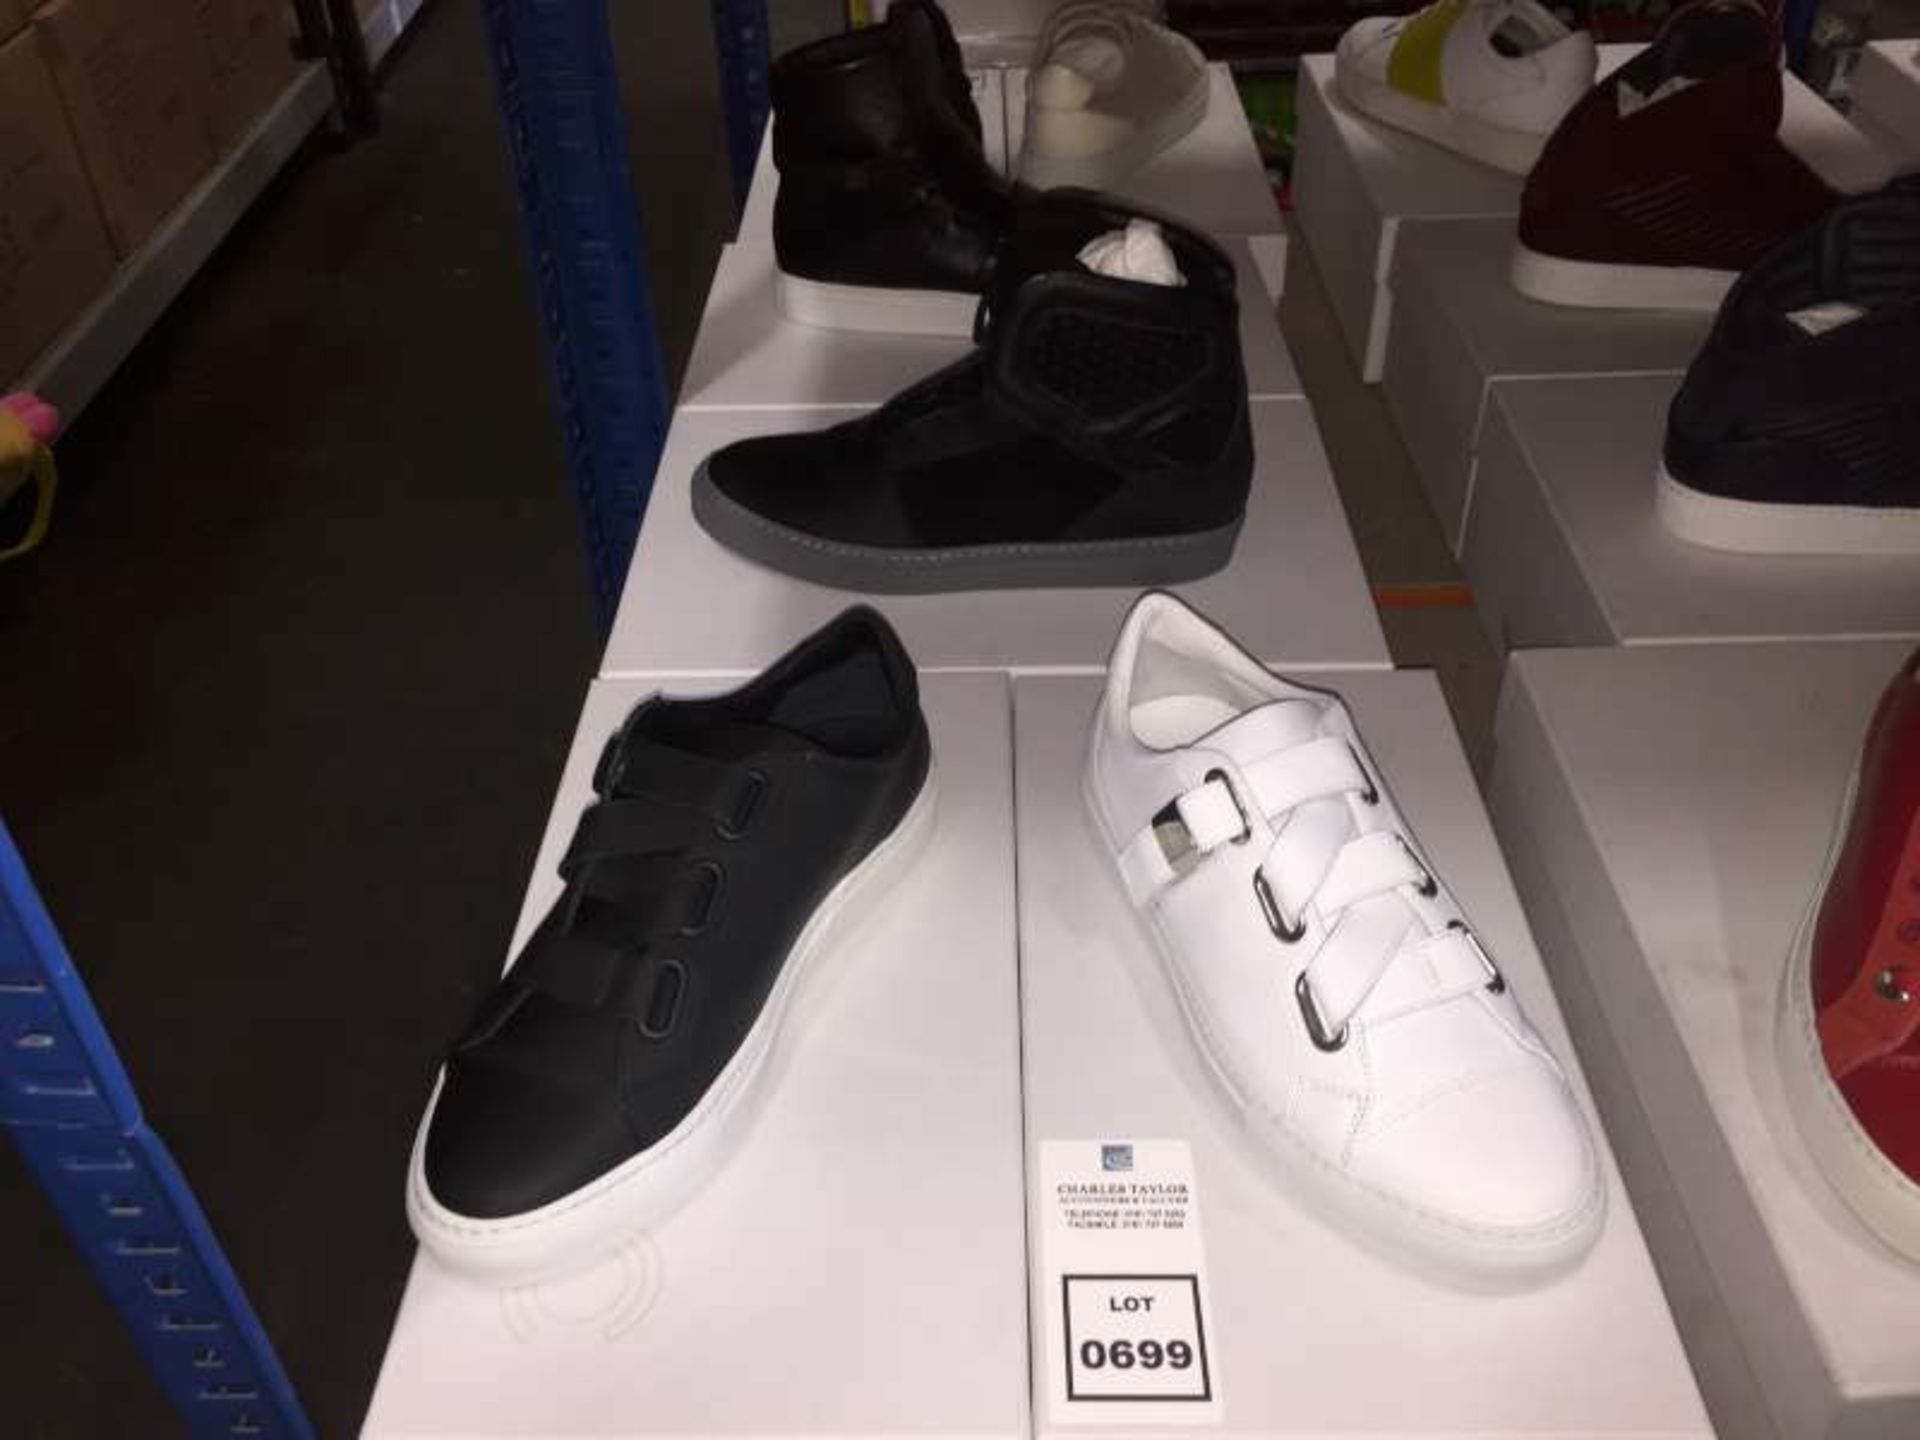 3 X BRAND NEW BOXED CIPHER LEATHER TRAINERS IN VARIOUS COLOURS AND STYLES SIZE 39 RRP £550.00